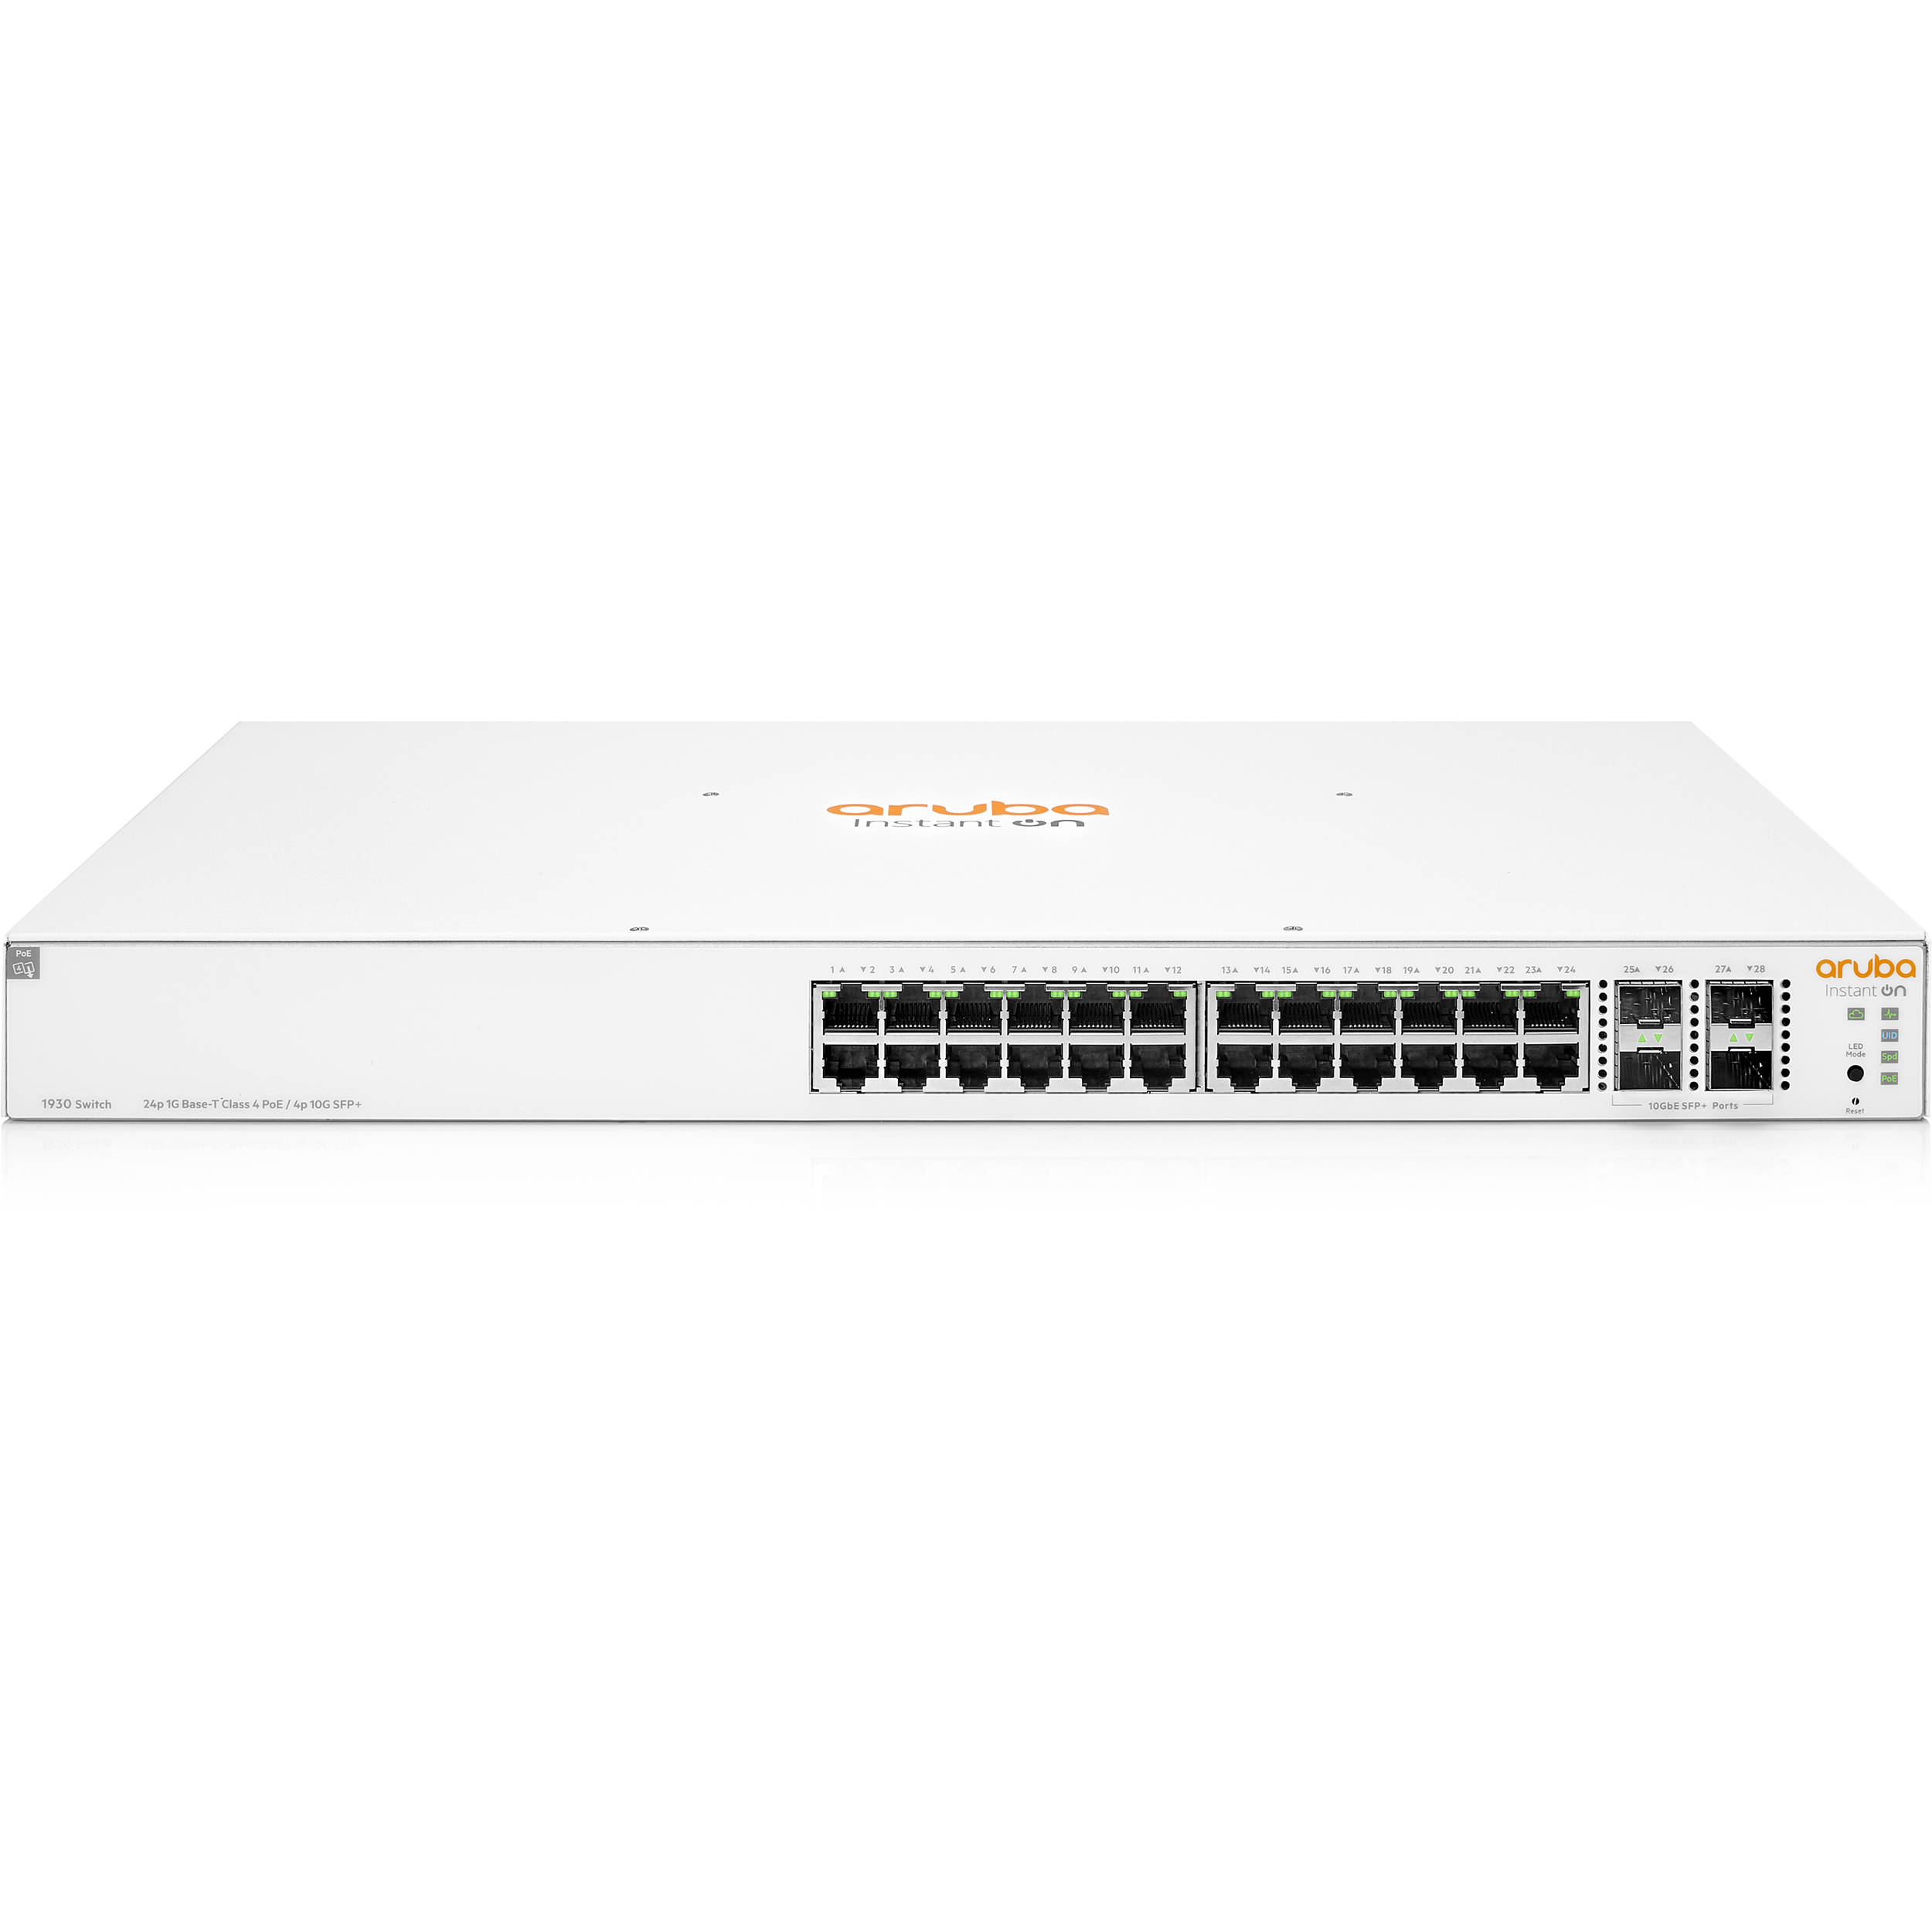 JL684A | 24-Port Gigabit PoE+ Compliant Managed Switch with 10Gb SFP+